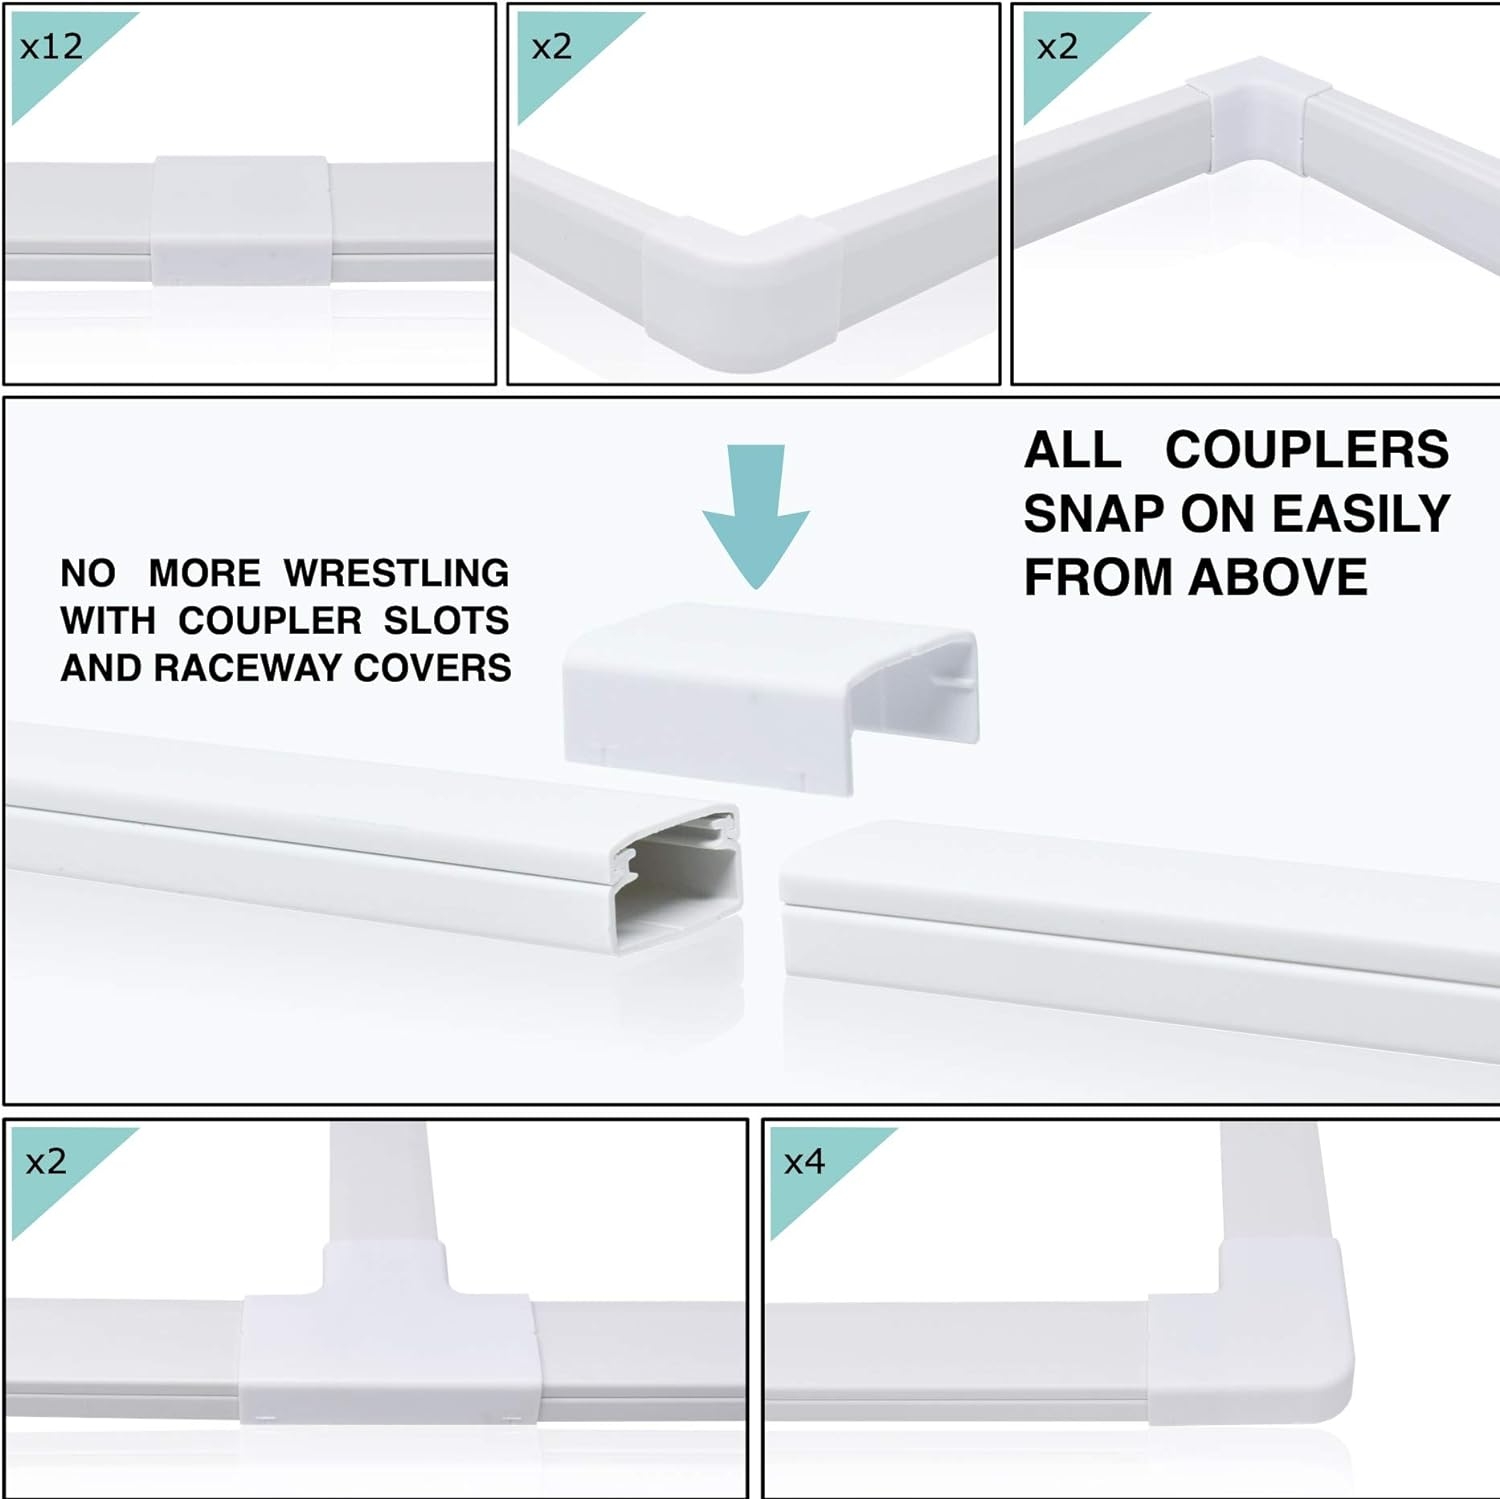 Cable Management On-Wall Raceway Kit, Easy Install, 200" Total w/19 Couplers, Covers Your Whole Project- Saves You Money, Conceal and Organize Cables & Wires Around Your Home, Office, TV